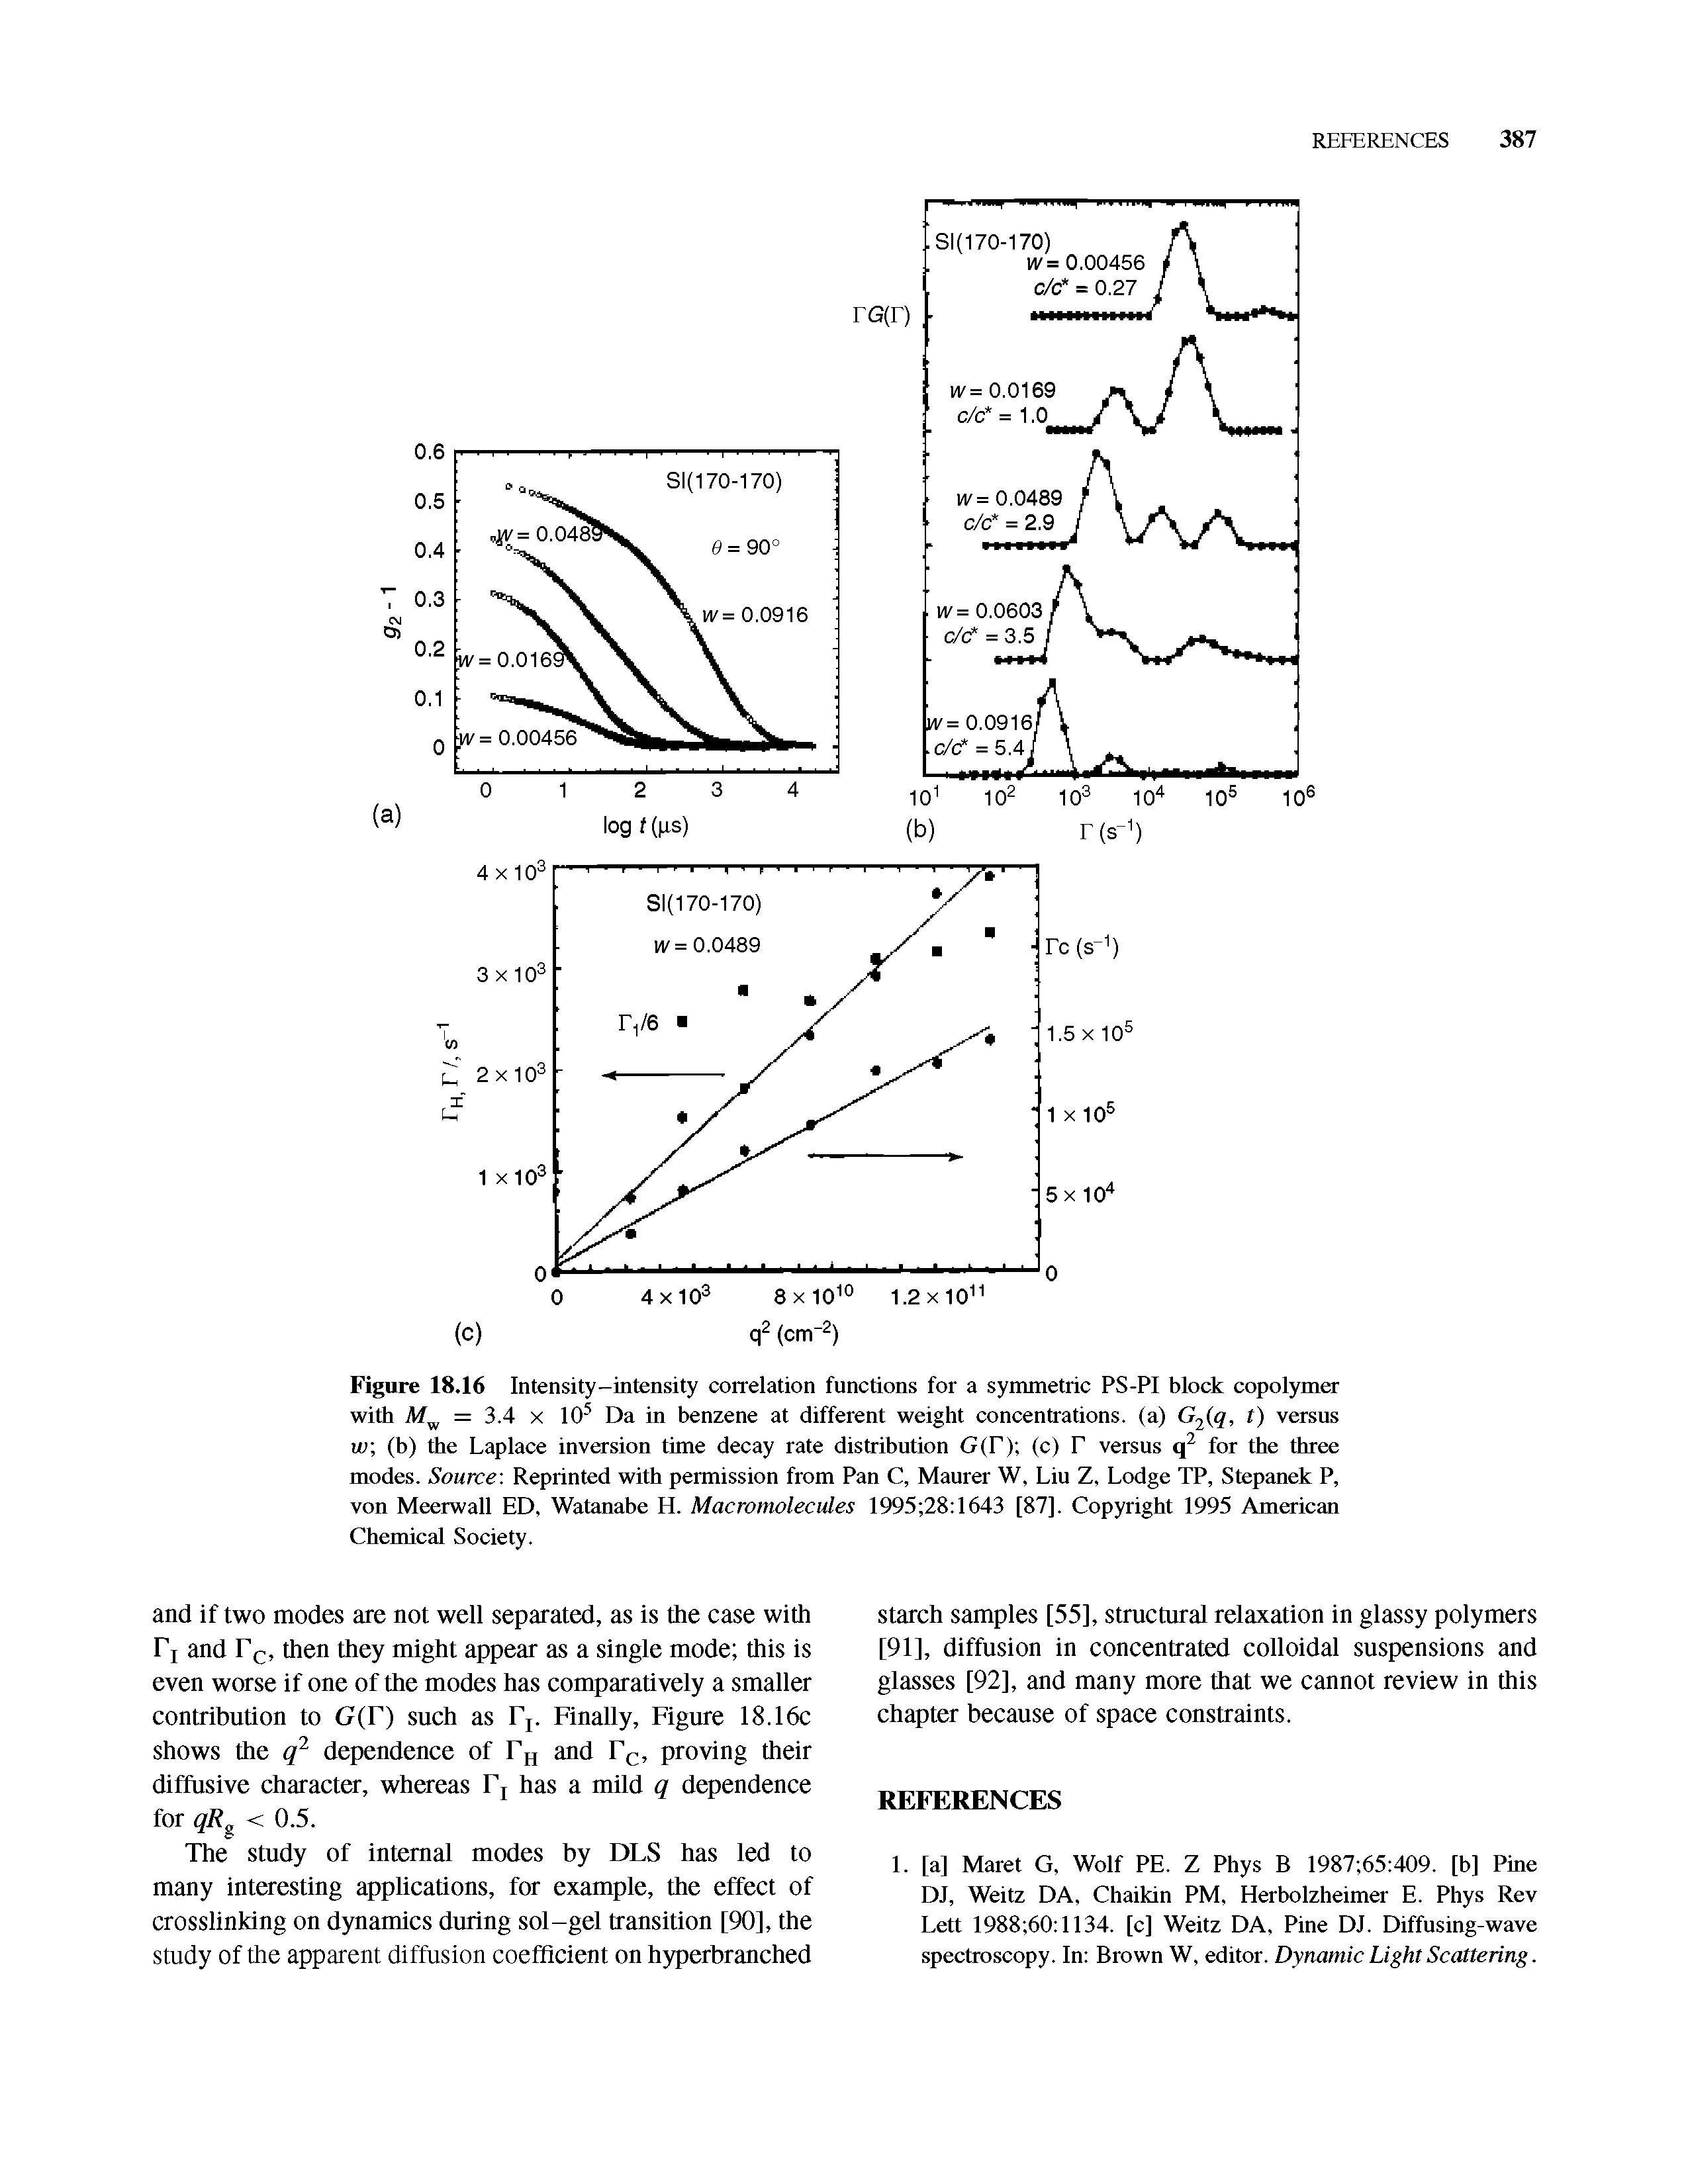 Figure 18.16 Intensity-intensity correlation functions for a symmetric PS-PI block copolymer with = 3.4 X 10 Da in benzene at different weight concentrations, (a) G2 q, t) versus w, (b) the Laplace inversion time decay rate distribution GiV) (c) F versus for the three modes. Source Reprinted with permission from Pan C, Maurer W, Liu Z, Lodge TP, Stepanek P, von Meerwall ED, Watanabe H. Macromolecules 1995 28 1643 [87]. Copyright 1995 American Chemical Society.